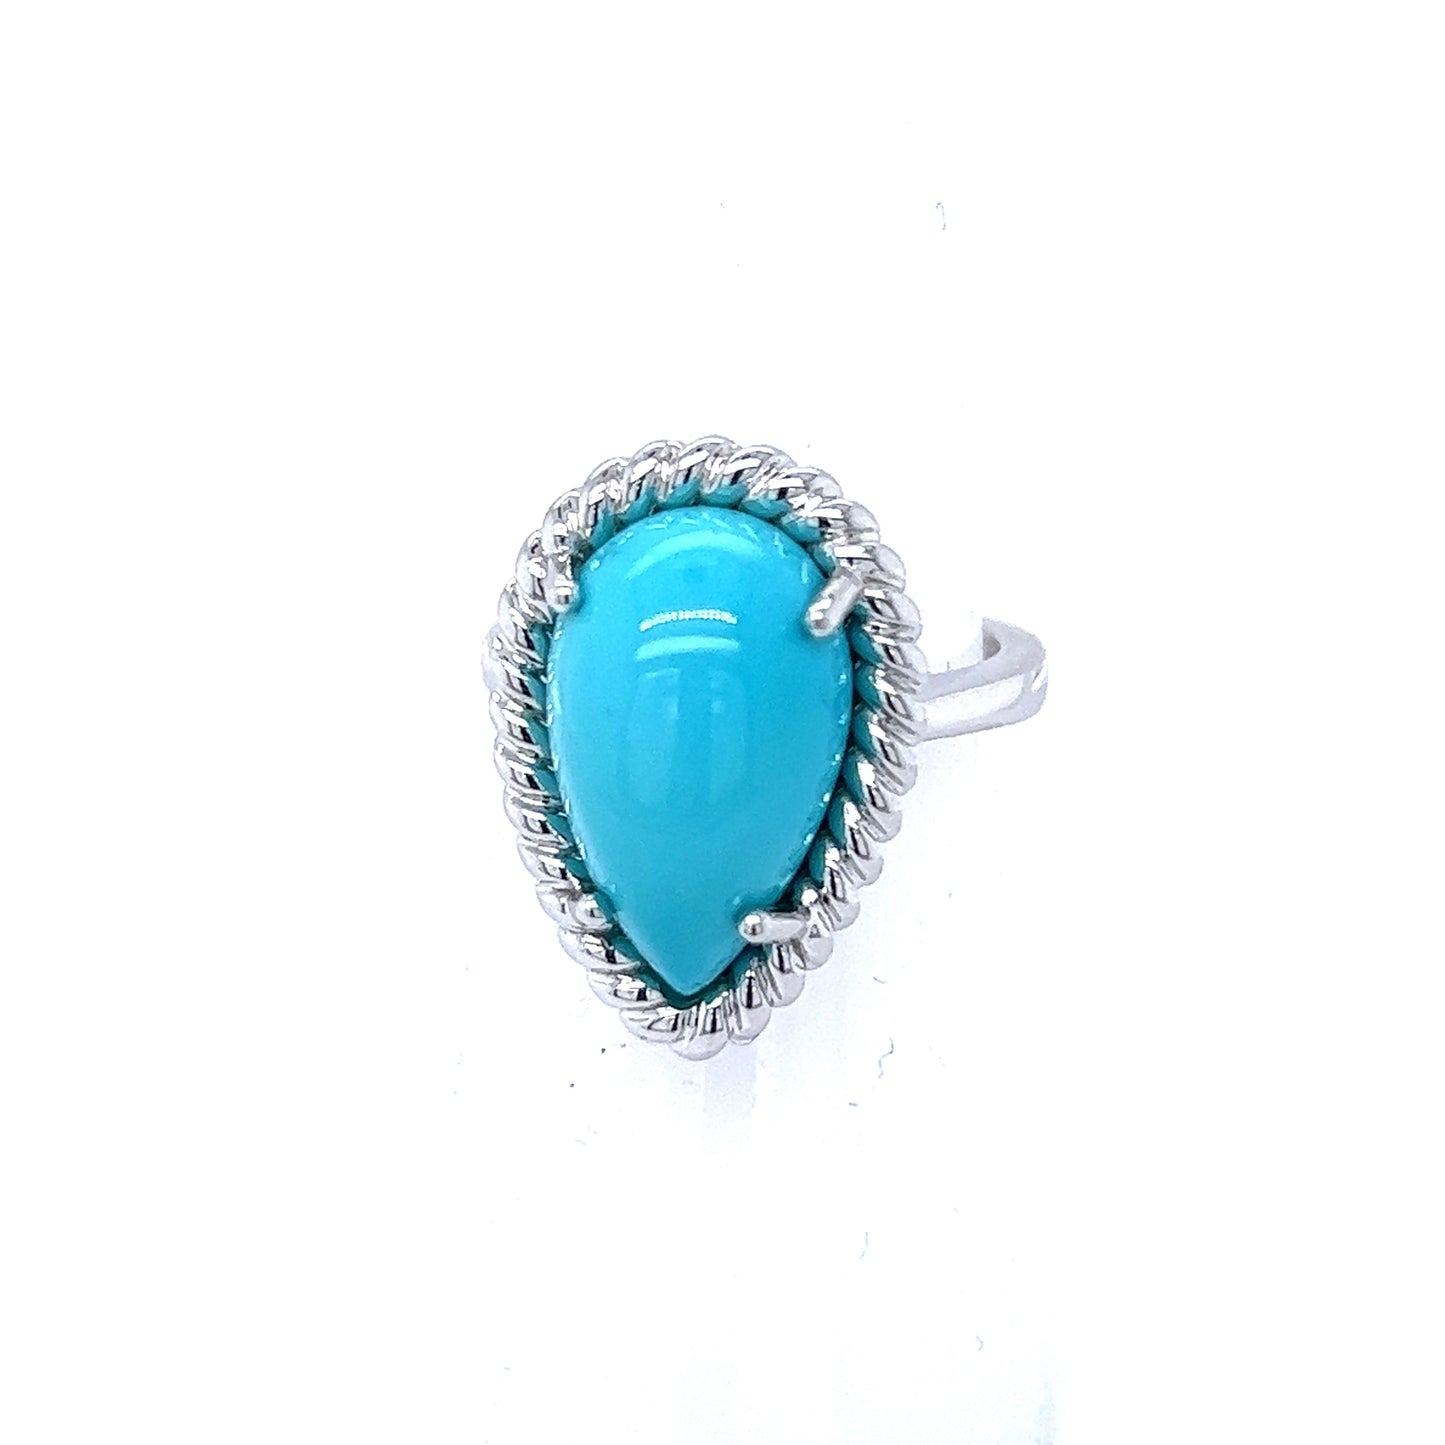 Natural Persian Turquoise Ring Size 6 14k White Gold 6.21 TCW Certified $4,250 221276